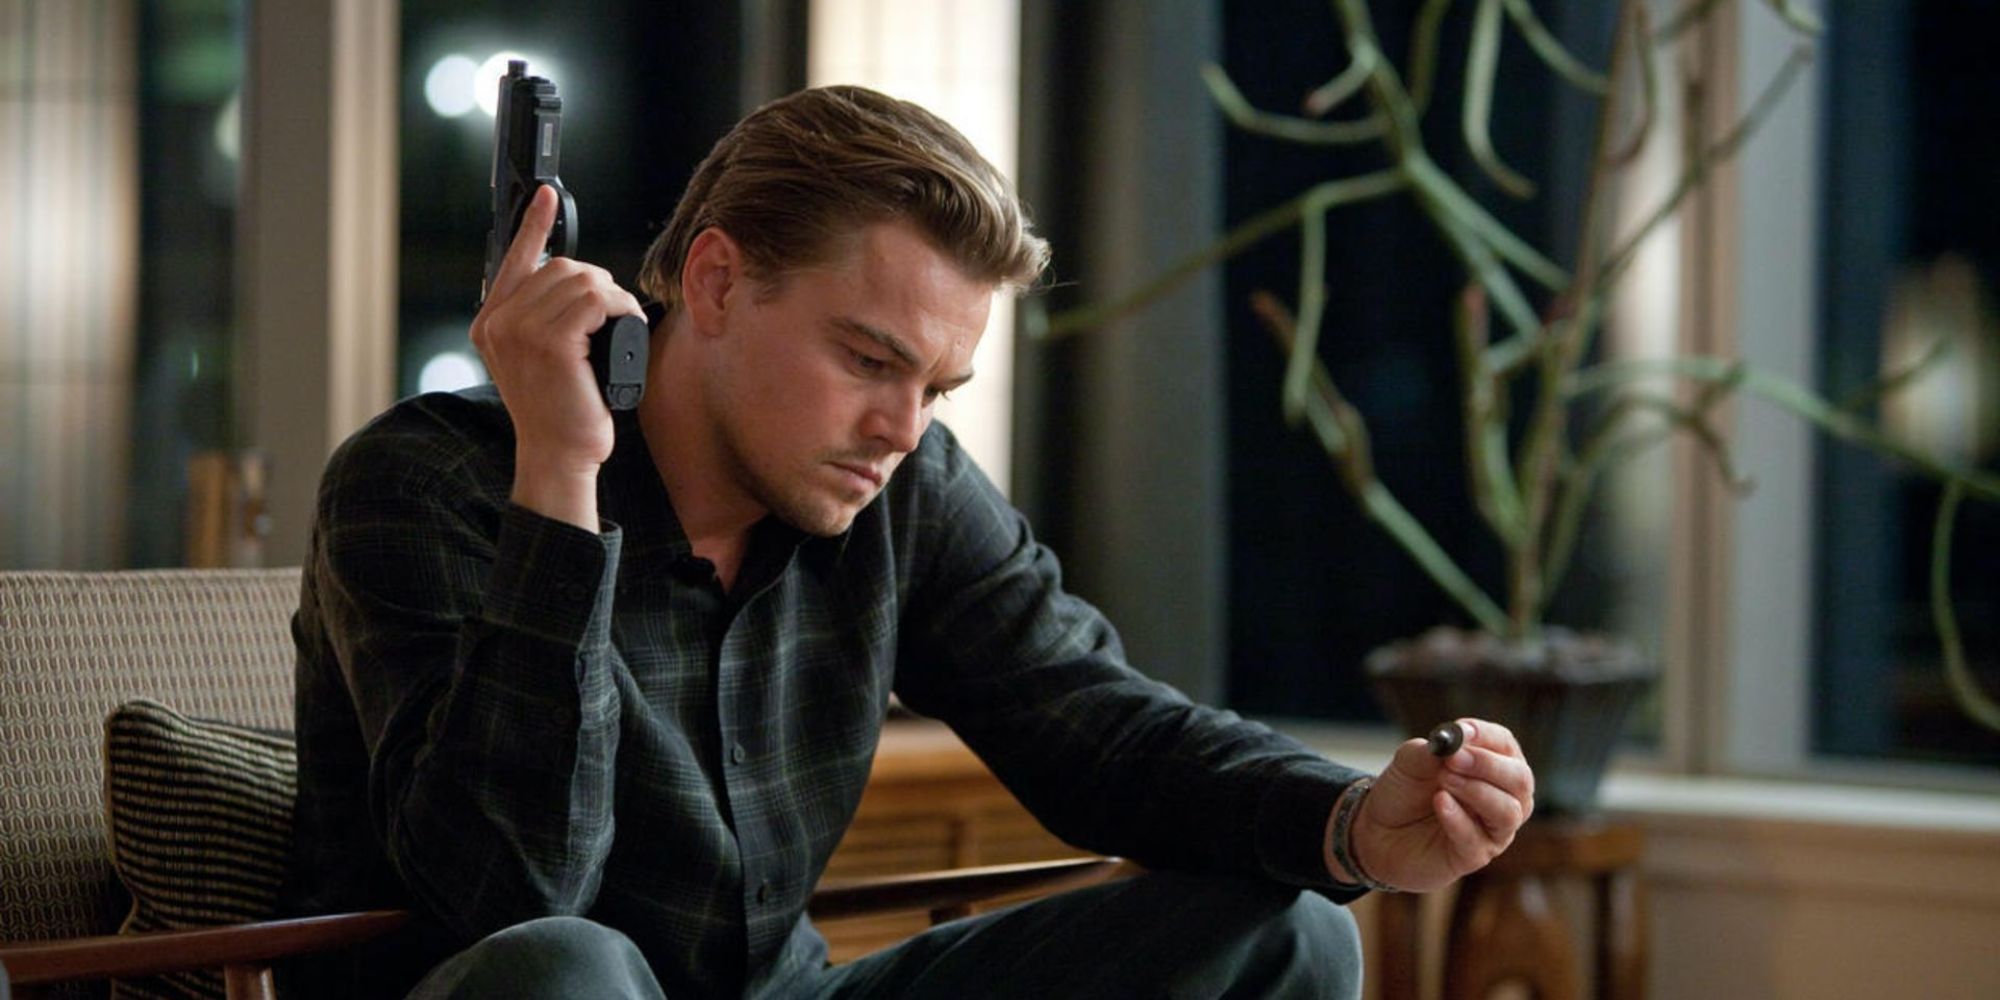 Leonardo DiCaprio as Cobb sits down and looks at his totem while holding a gun in Inception